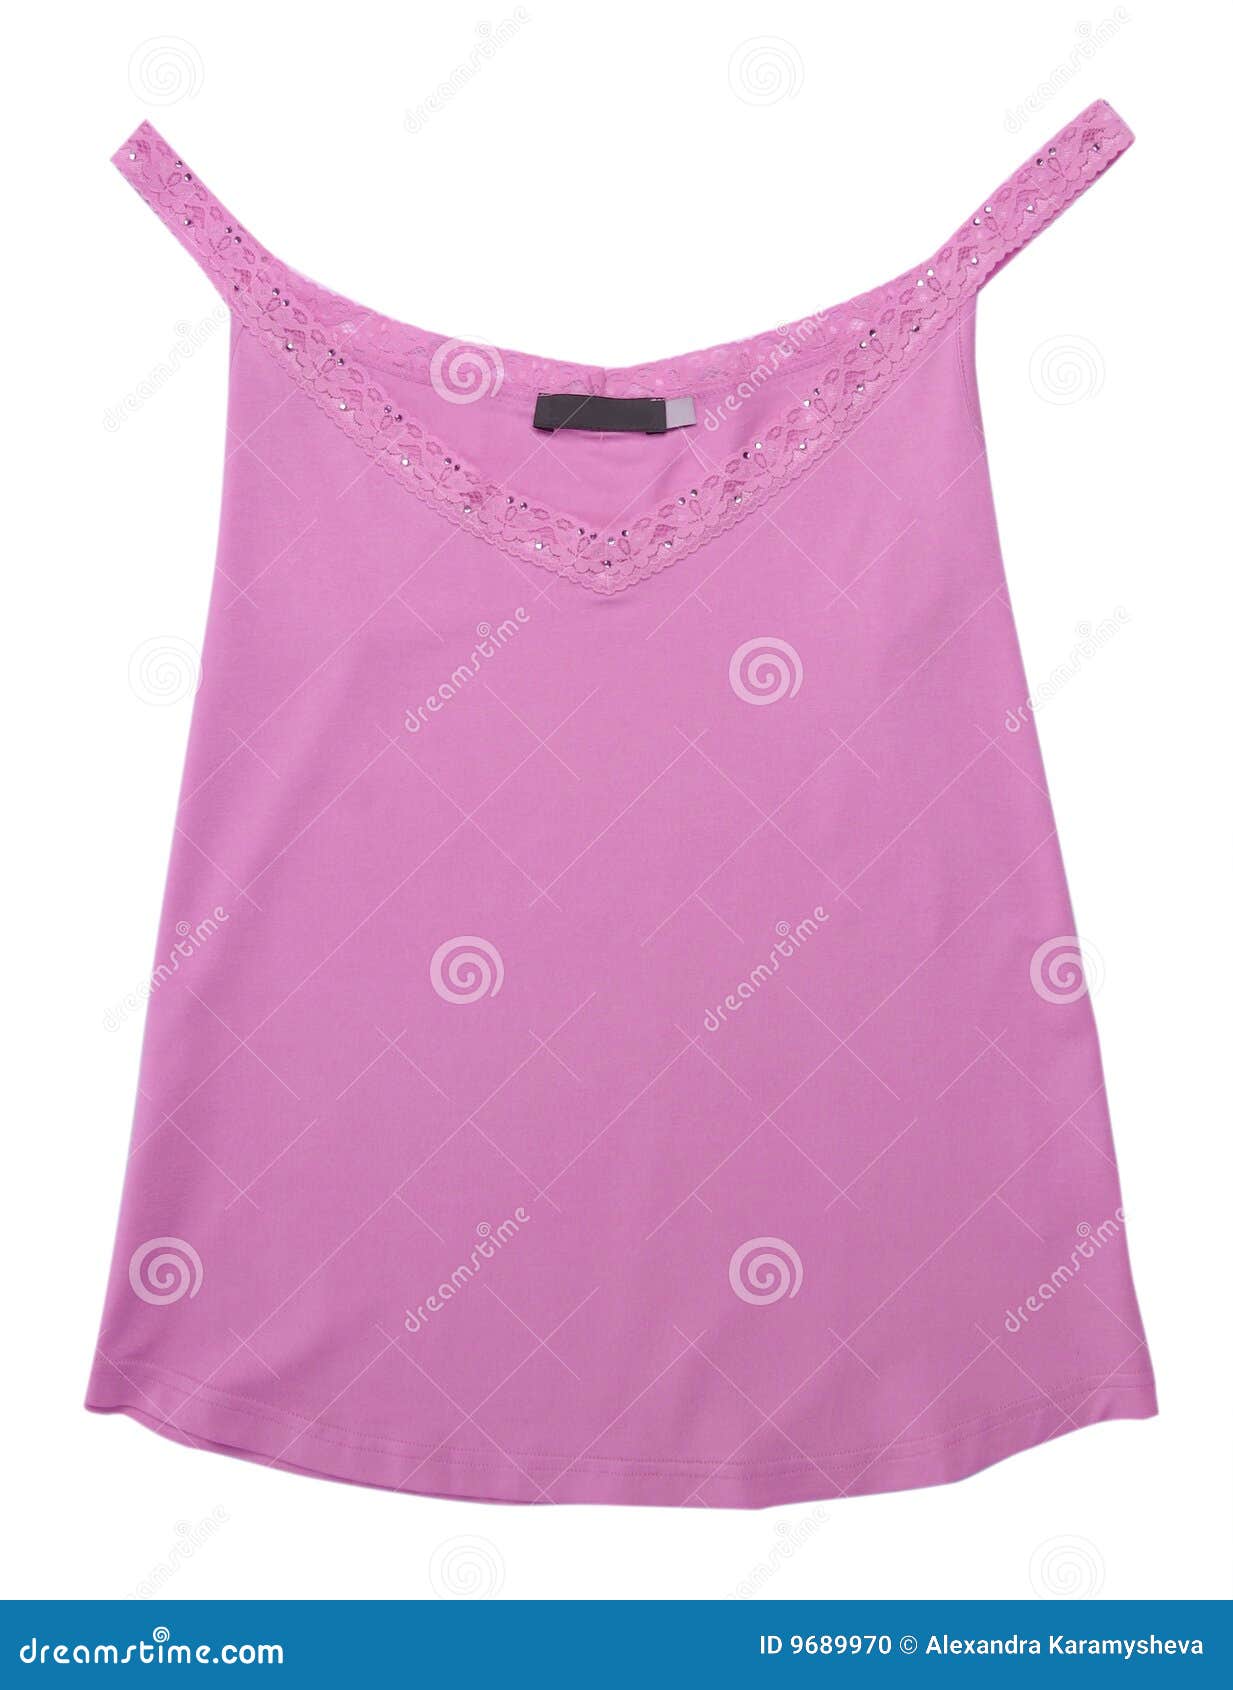 Pink Lace Blouse Shirt Vest Stock Photo - Image of classic, create: 9689970